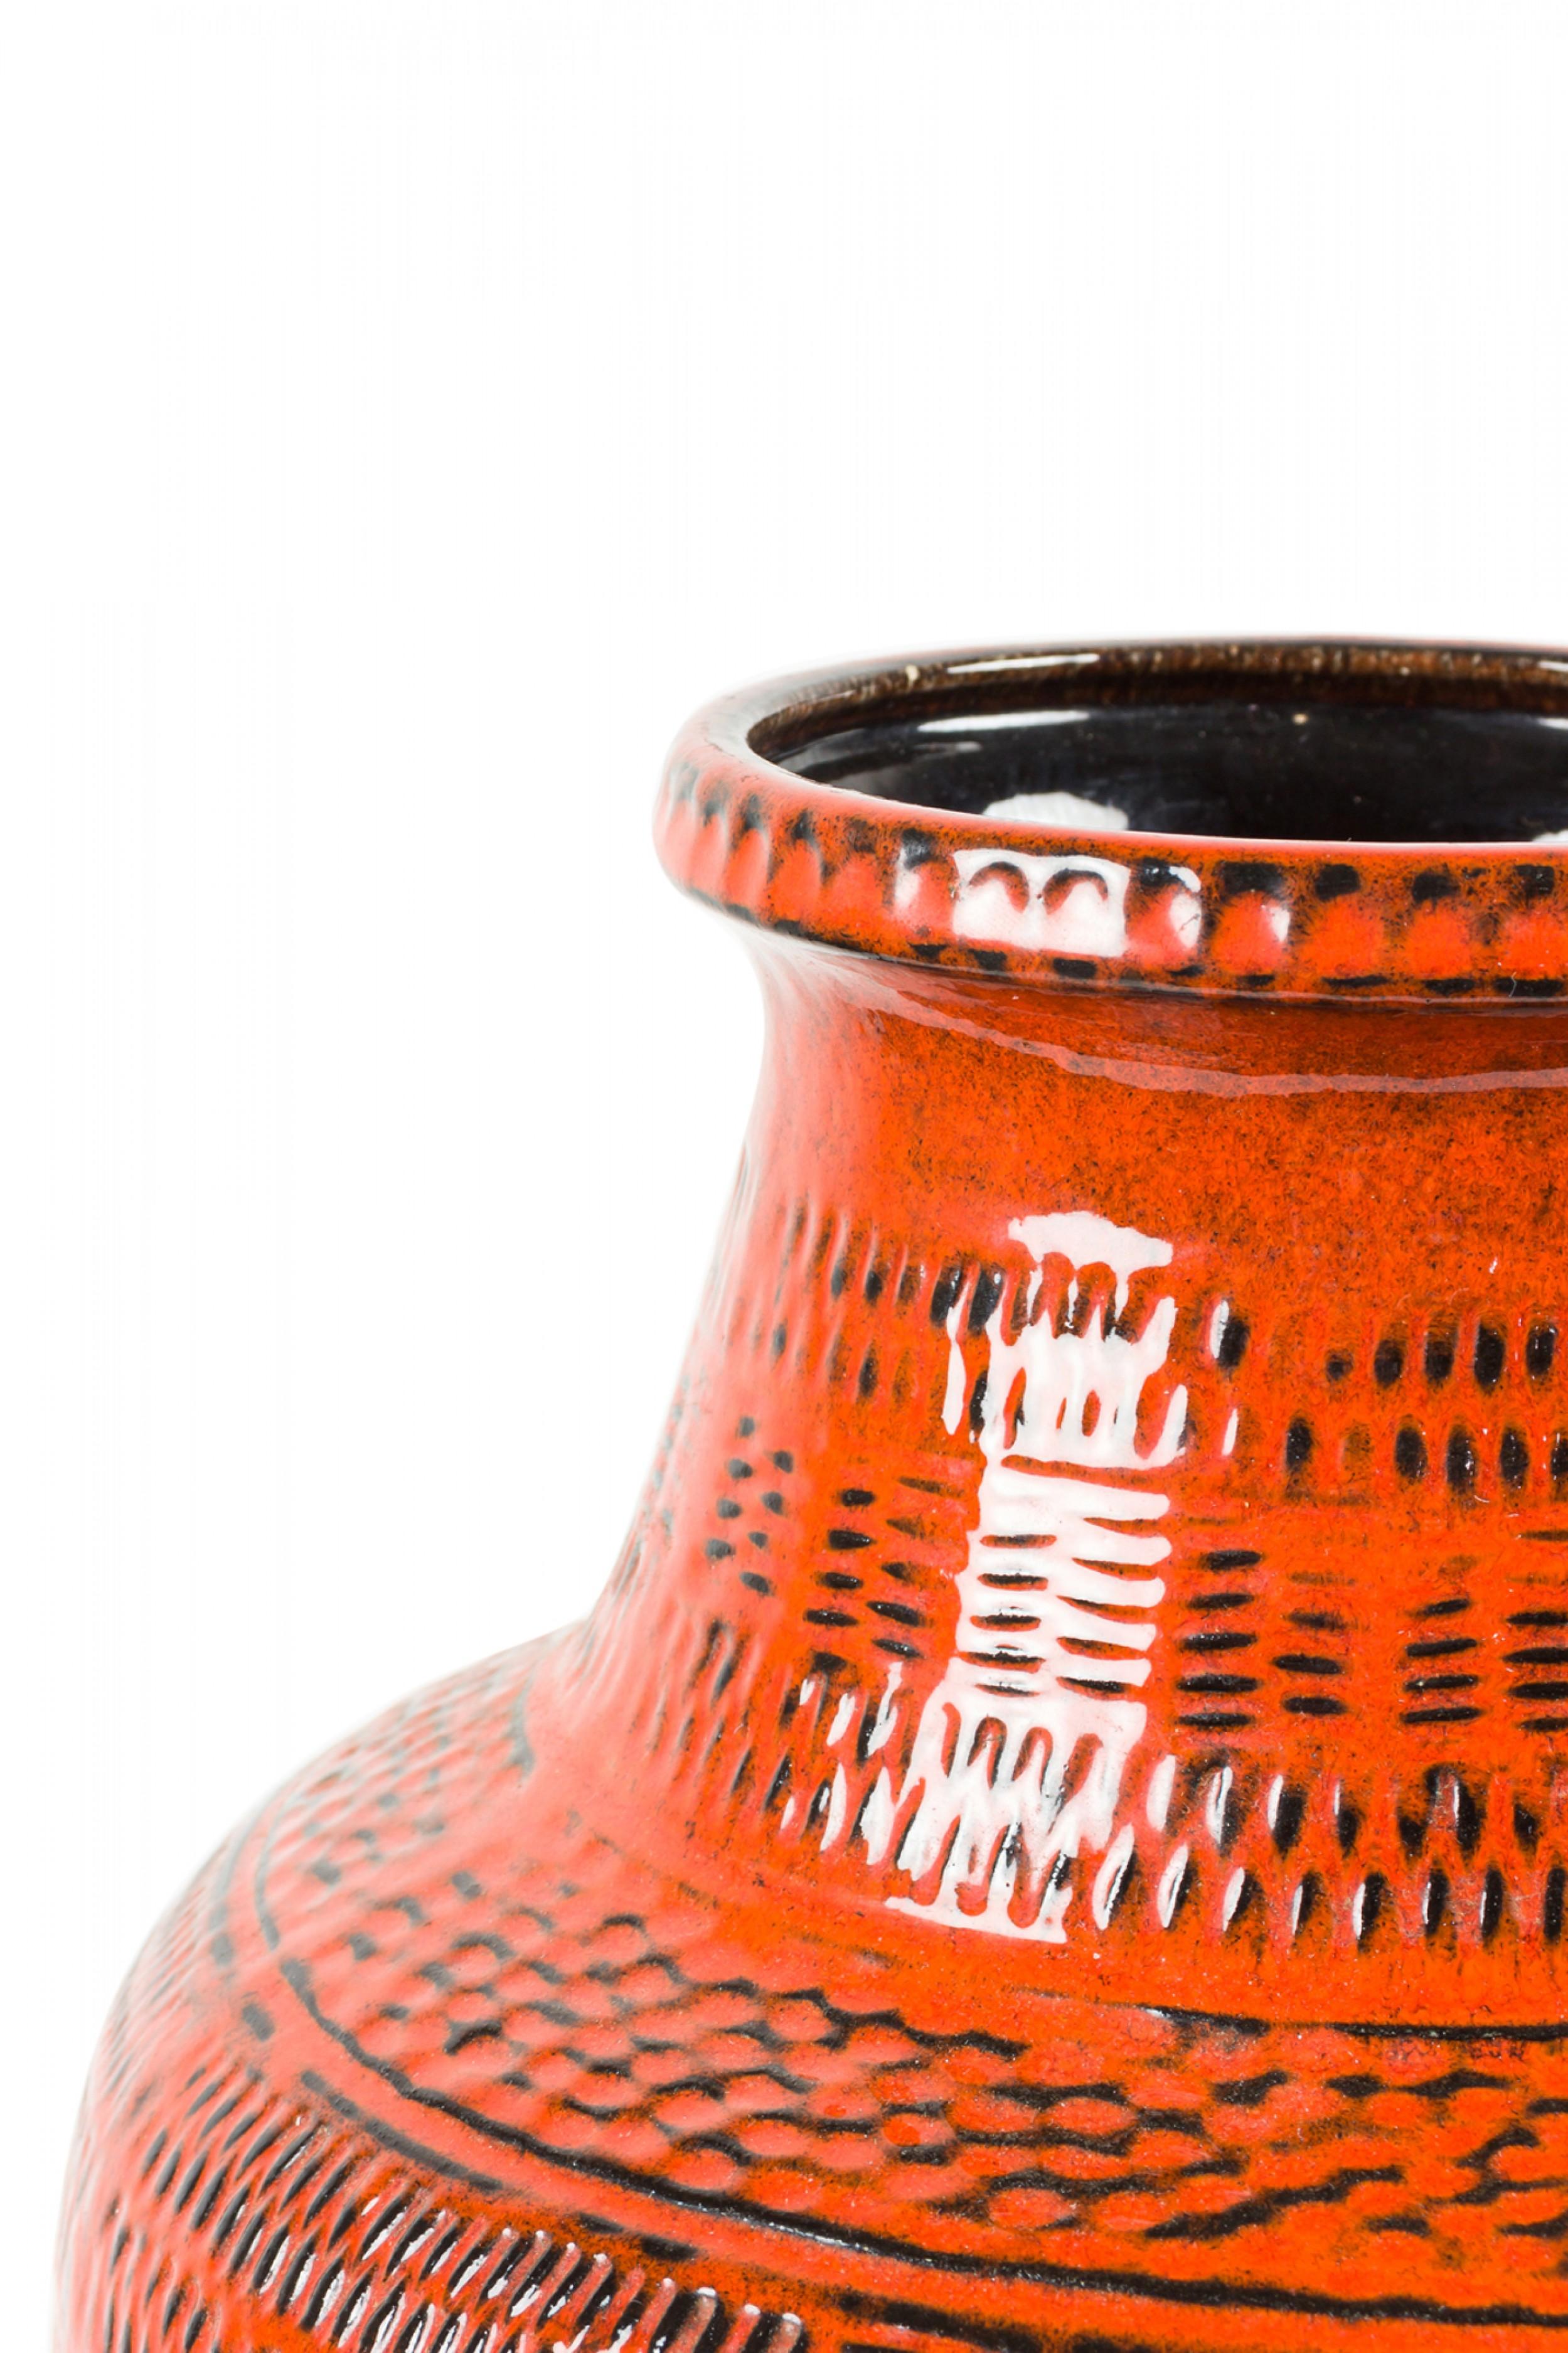 West German mid-century cylindrical ceramic vase with a raised irregular pattern of geometric shapes, highlighted and dotted in black against a rust orange glaze. (BAY KERAMIC 